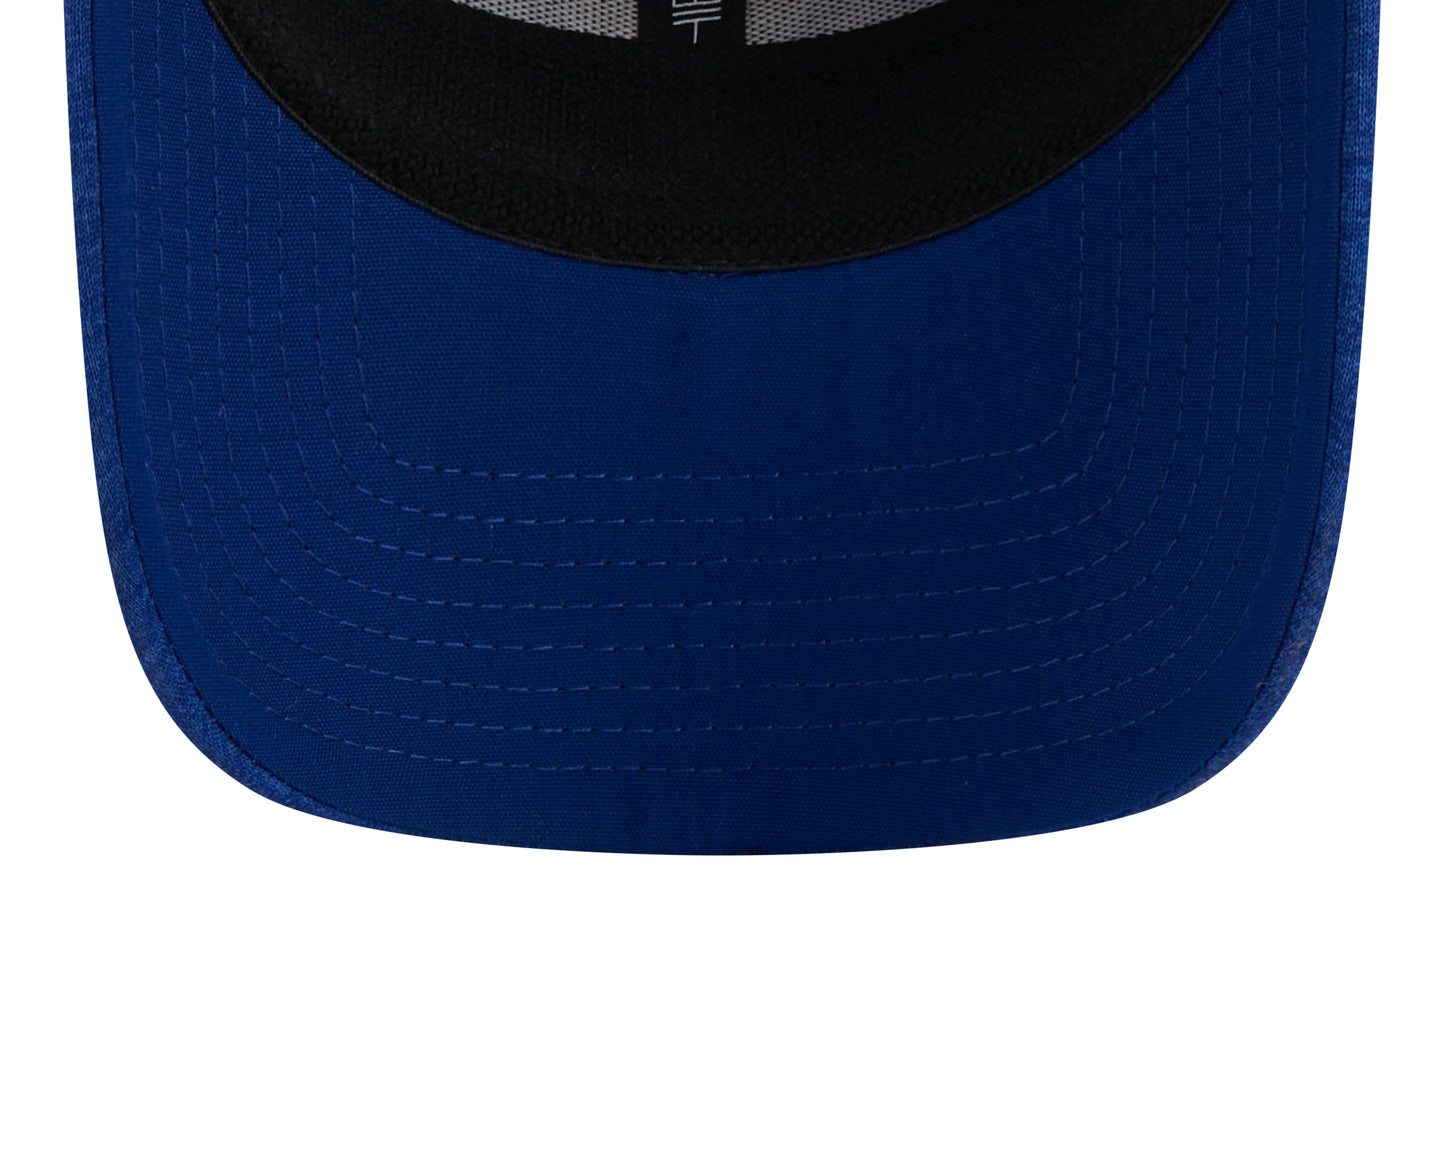 Chicago Cubs Team 39THIRTY Royal/Gray Shadowed Neo Flex Fit Hat By New Era